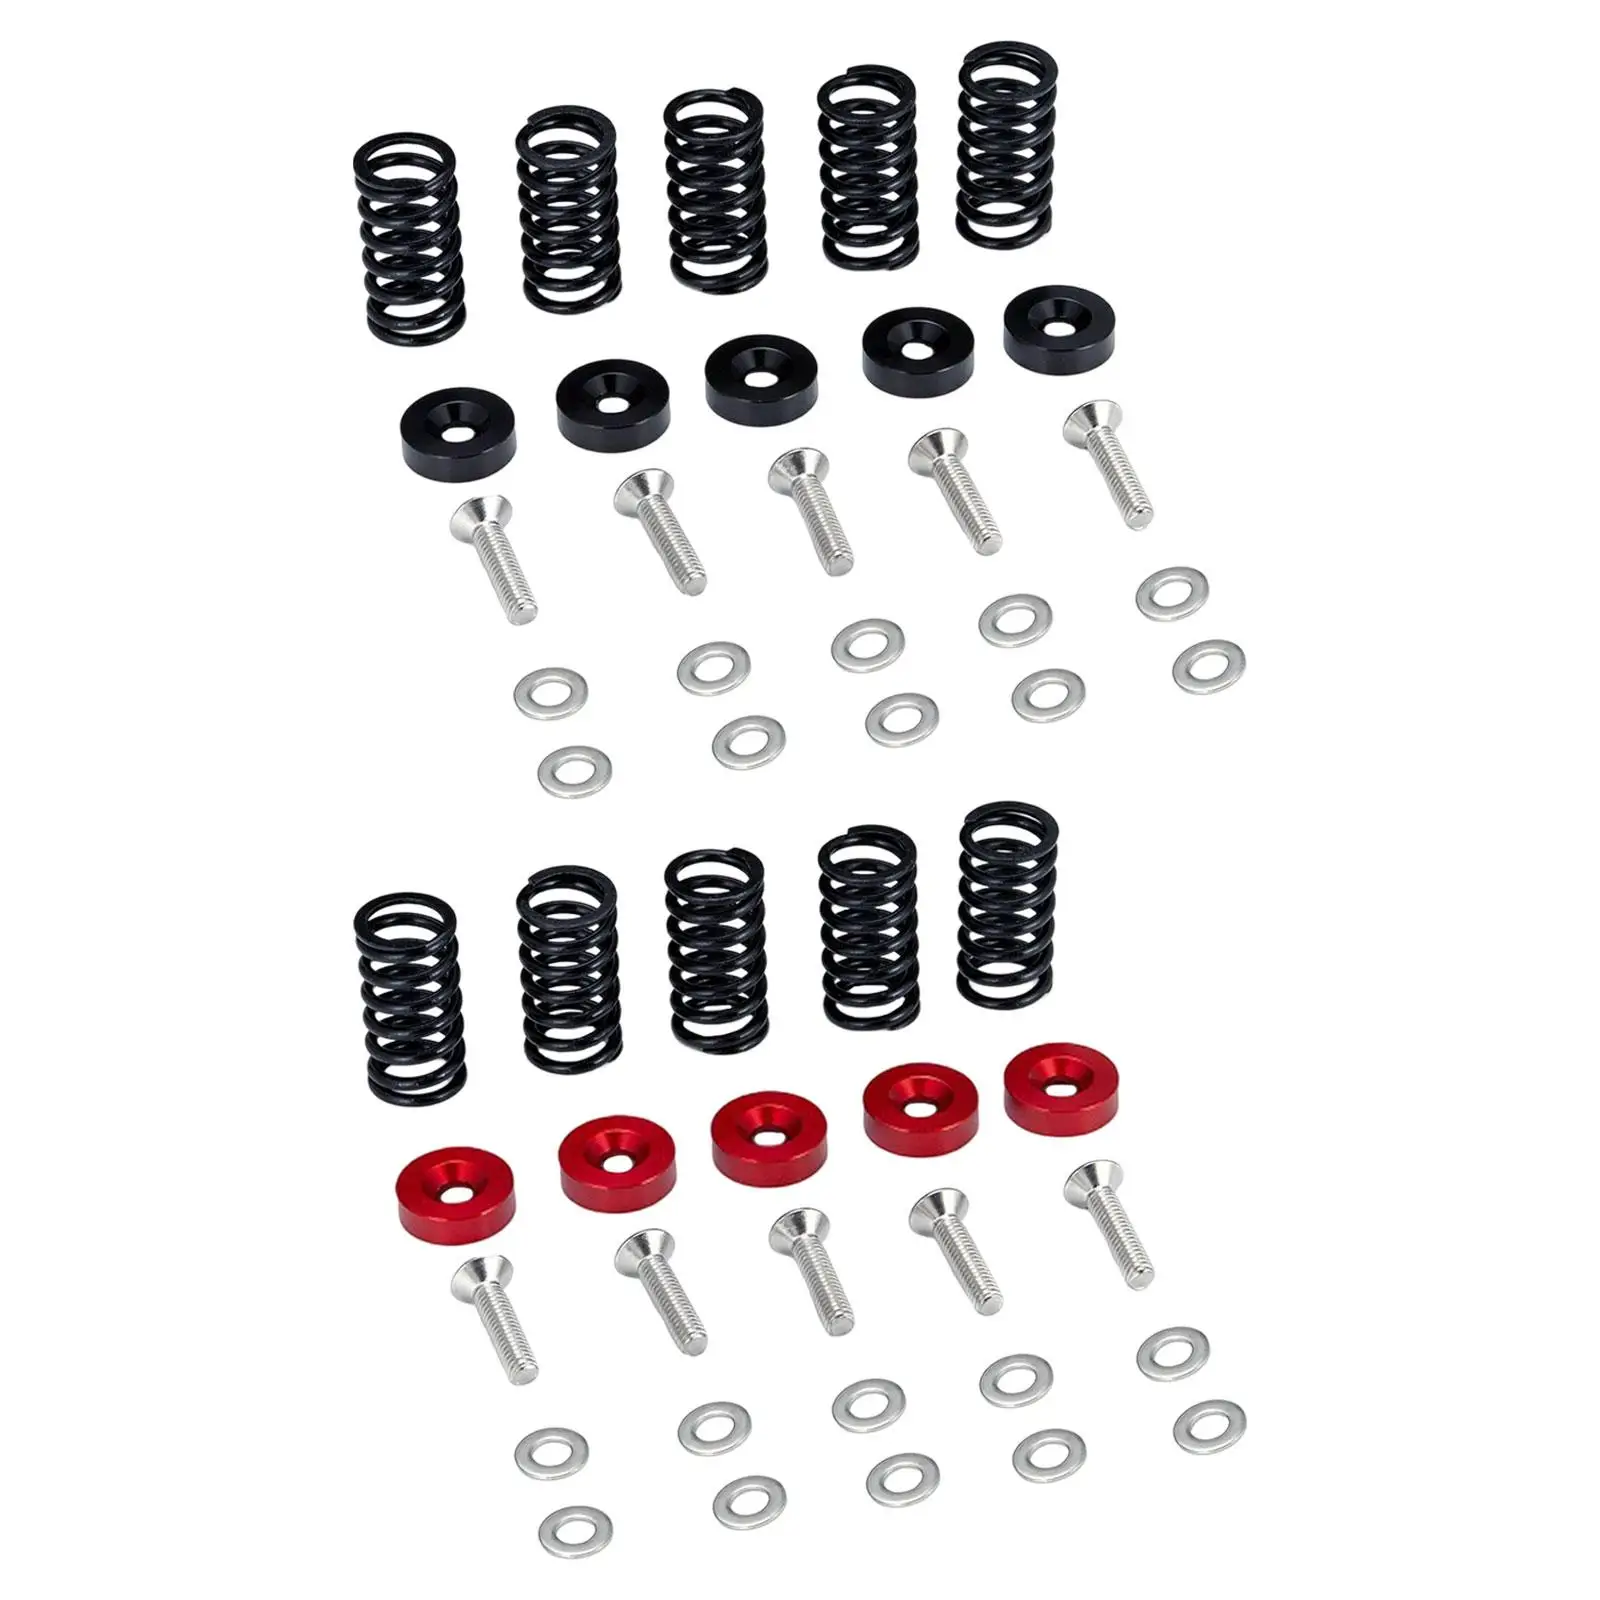 Reinforced Clutch Spring Screw Set Motorcycle Parts for Crf250L